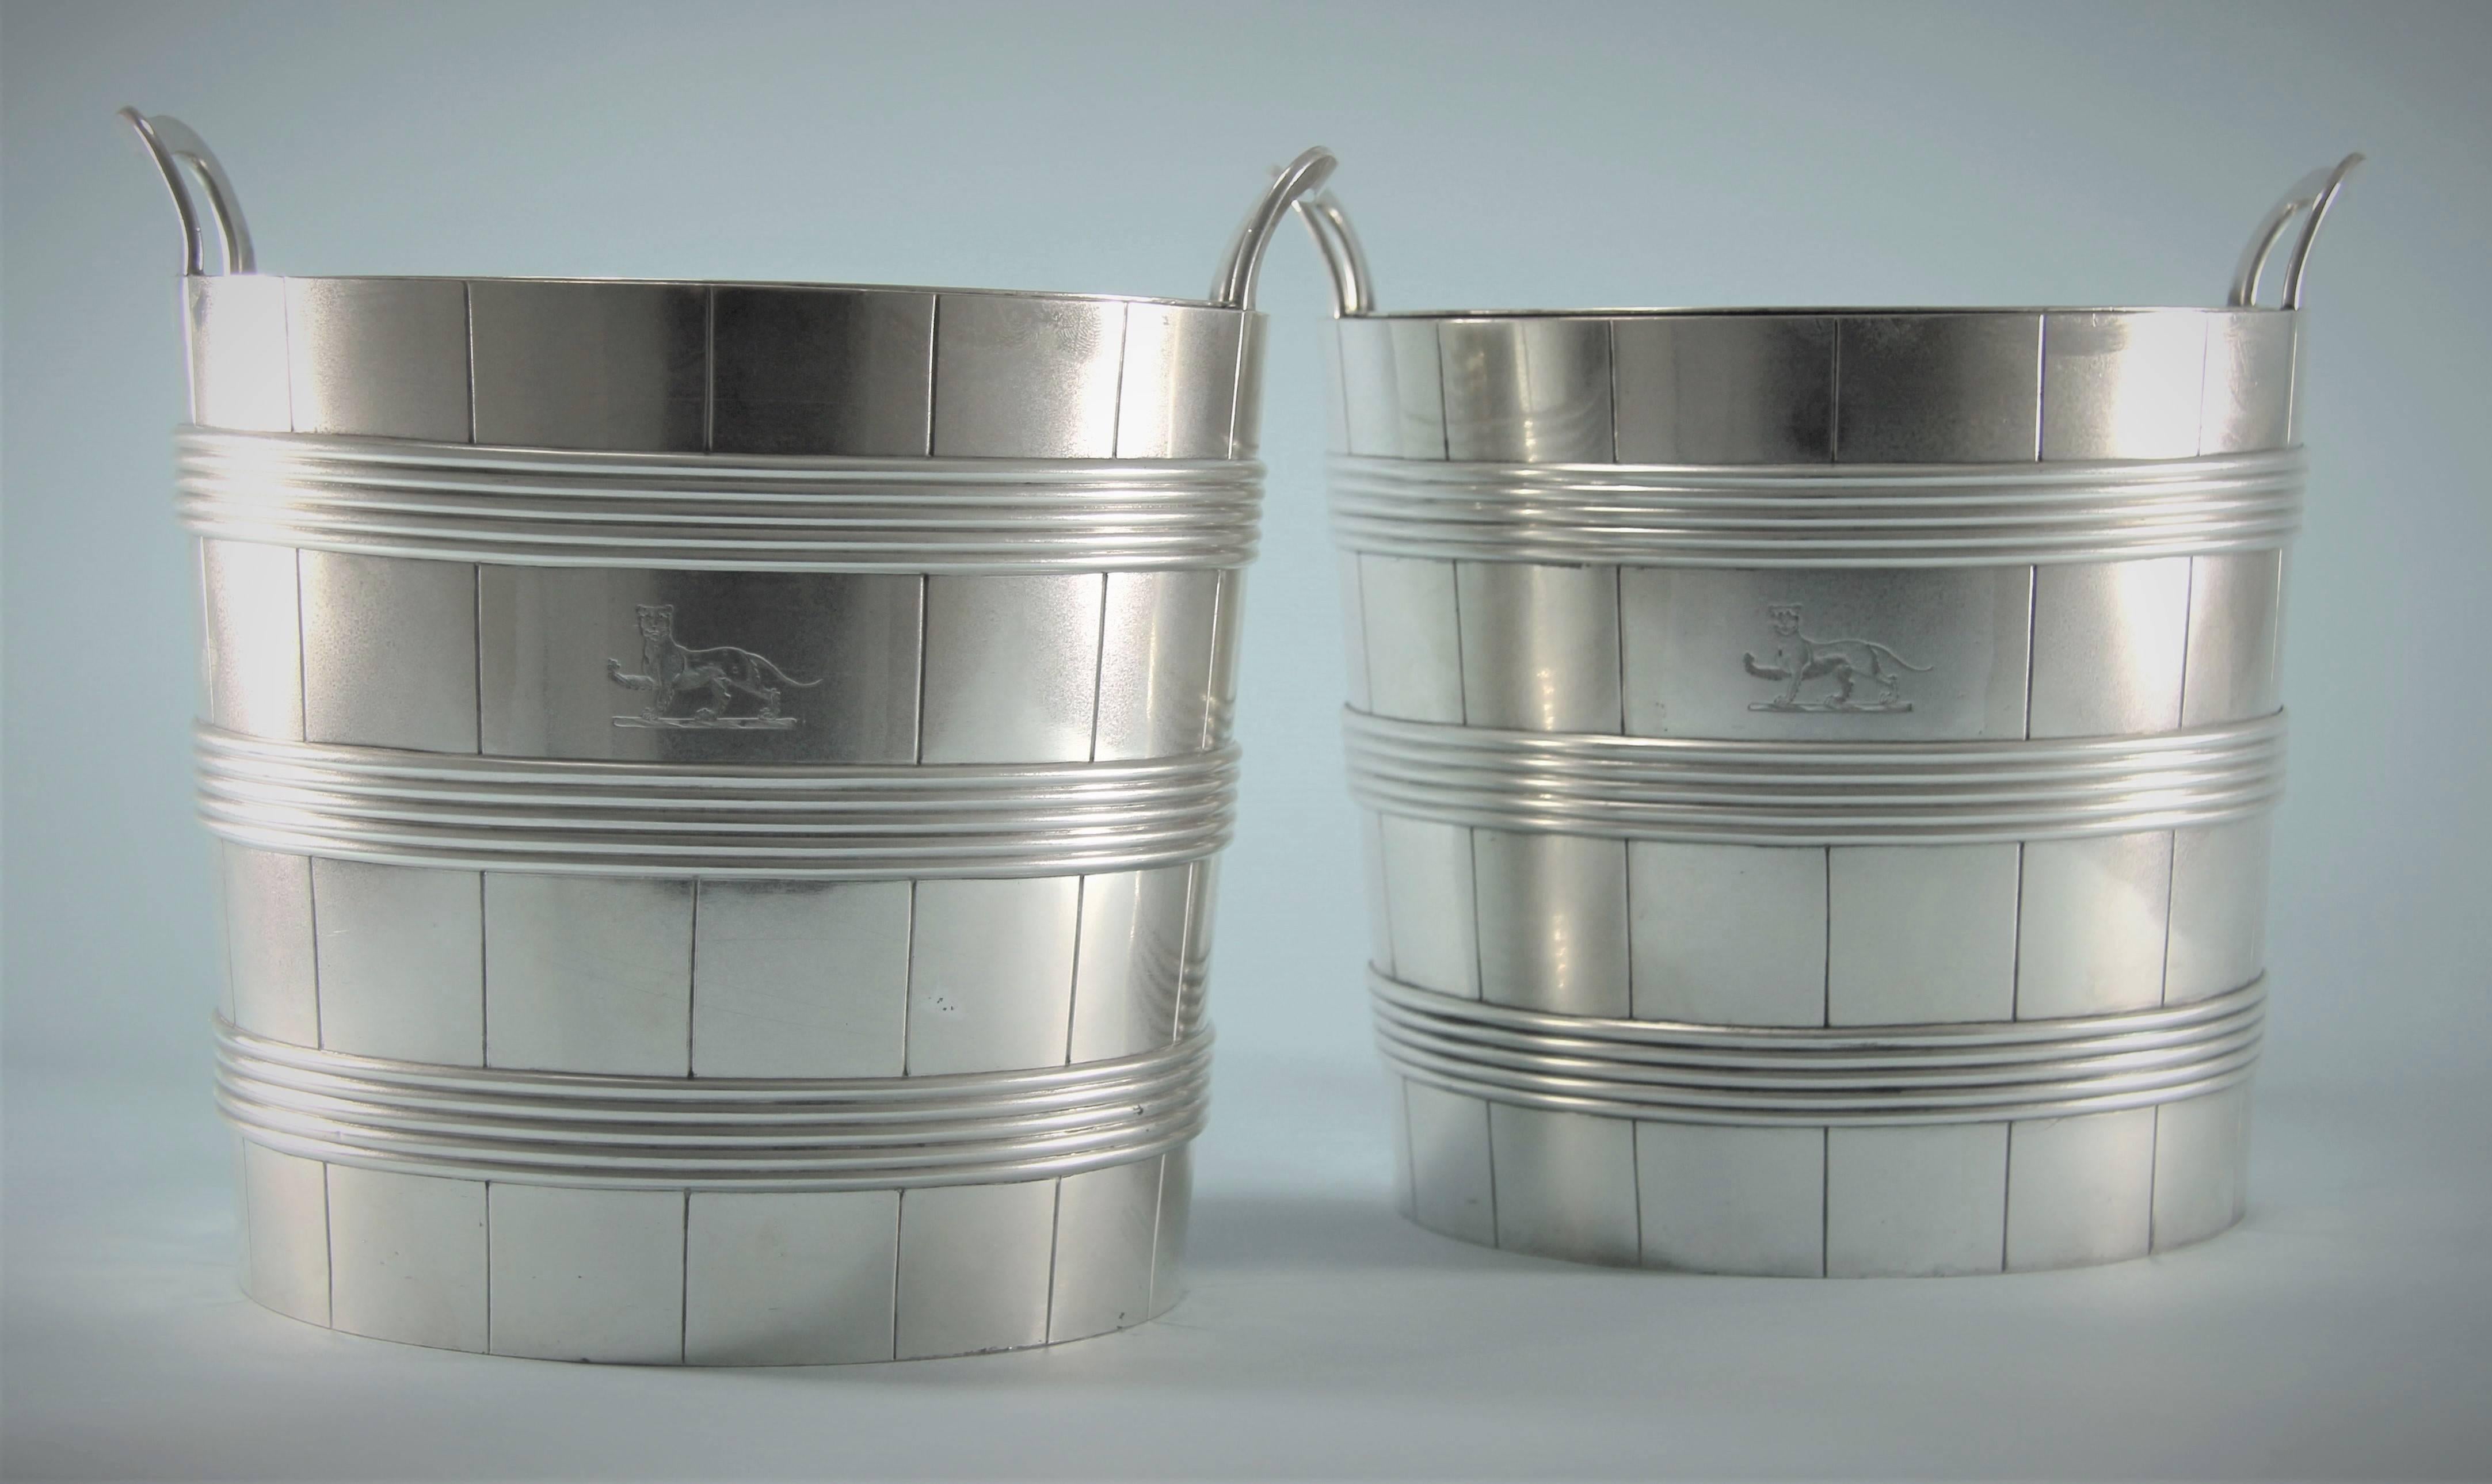 Smart and highly sought after pair of George III barrel shaped Old Sheffield plate wine coolers,
circa 1810-1820. 

These wine coolers are complete with a removable lead liner held in place by an Old Sheffield plate collar.
A contemporary family